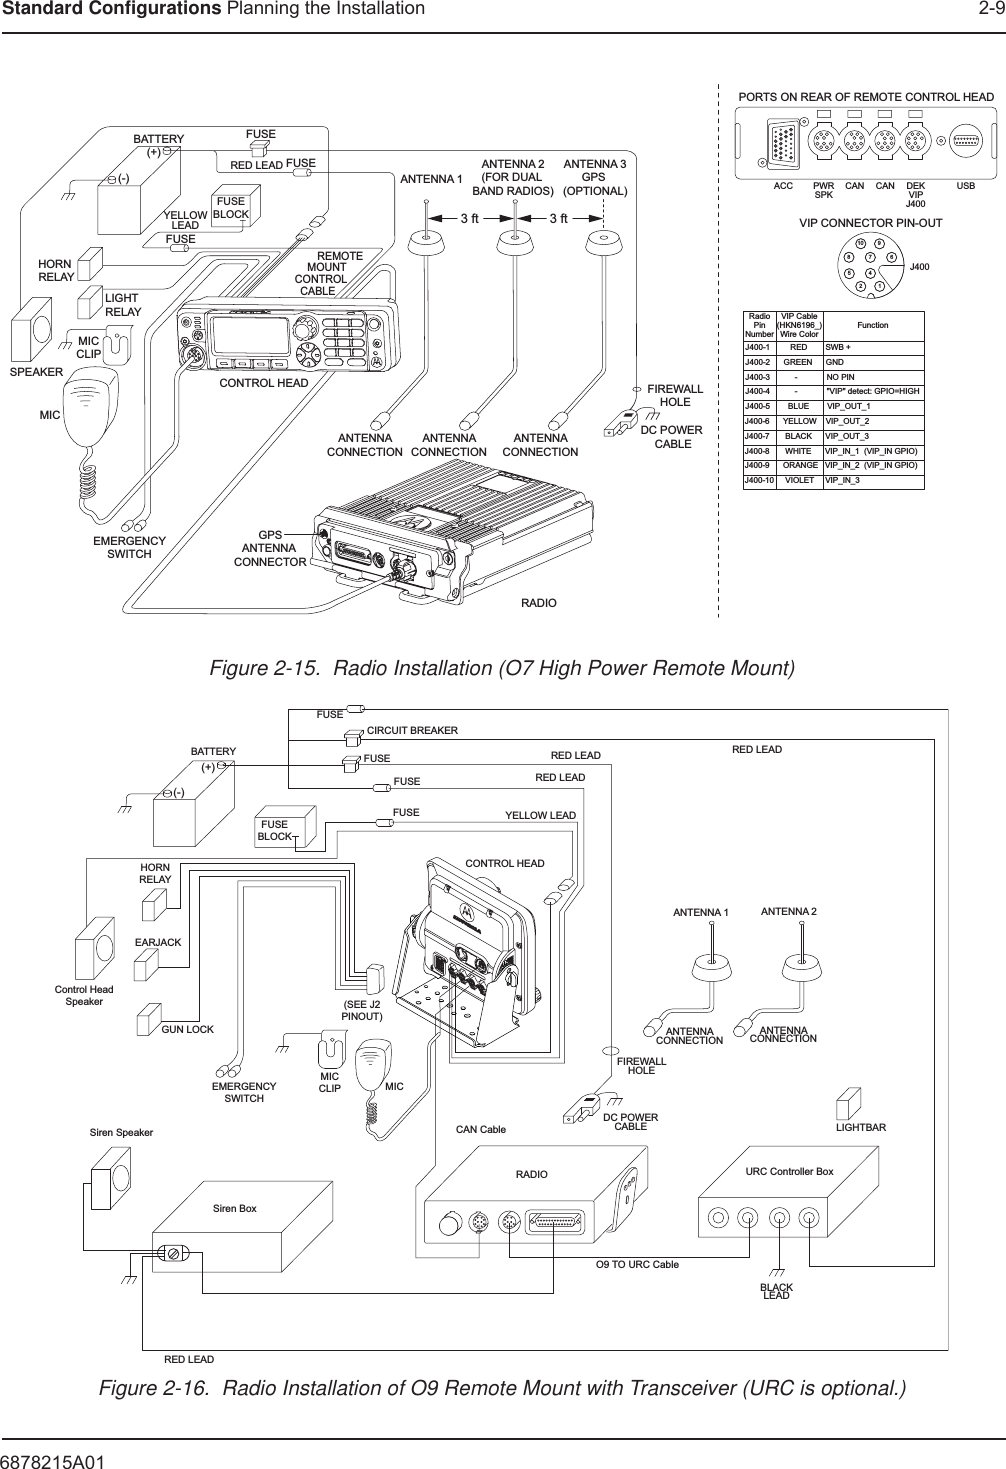 6878215A01Standard Configurations Planning the Installation 2-9Figure 2-15.  Radio Installation (O7 High Power Remote Mount)Figure 2-16.  Radio Installation of O9 Remote Mount with Transceiver (URC is optional.)EMERGENCYSWITCHFIREWALLHOLEANTENNA CONNECTION GPSANTENNA CONNECTORDC POWER CABLEANTENNA CONNECTION RADIOCONTROL HEADBATTERYHORN RELAYLIGHT RELAYMICCLIPSPEAKERMICRED LEADFUSEBLOCKYELLOWLEAD(+)(-)FUSEFUSE               REMOTE      MOUNT     CONTROL   CABLEANTENNA 1ANTENNA 2(FOR DUAL BAND RADIOS)ANTENNA CONNECTION ANTENNA 3GPS (OPTIONAL)FUSEPWRSPKCAN CAN DEKVIPJ400ACC USBPORTS ON REAR OF REMOTE CONTROL HEADVIP CONNECTOR PIN-OUTJ4006910742581J400-1         RED        SWB +J400-2      GREEN      GNDJ400-3           -             NO PINJ400-4           -             &quot;VIP&quot; detect: GPIO=HIGHJ400-5        BLUE        VIP_OUT_1 J400-6      YELLOW    VIP_OUT_2J400-7       BLACK      VIP_OUT_3J400-8       WHITE      VIP_IN_1  (VIP_IN GPIO)J400-9      ORANGE   VIP_IN_2  (VIP_IN GPIO)J400-10     VIOLET     VIP_IN_3 RadioPinNumberVIP Cable(HKN6196_)Wire ColorFunction3 ft 3 ftMICMICCLIPEMERGENCYSWITCH(SEE J2PINOUT)GUN LOCKEARJACKControl HeadSpeakerSiren SpeakerSiren BoxRED LEADHORNRELAYANTENNA 1ANTENNACONNECTIONFIREWALLHOLEDC POWERCABLEURC Controller BoxBLACKLEADLIGHTBARO9 TO URC CableRADIOCAN CableANTENNACONNECTIONANTENNA 2(+)(-)RED LEADRED LEADRED LEADYELLOW LEADCONTROL HEADFUSEFUSEFUSEFUSEBLOCKBATTERYFUSECIRCUIT BREAKER